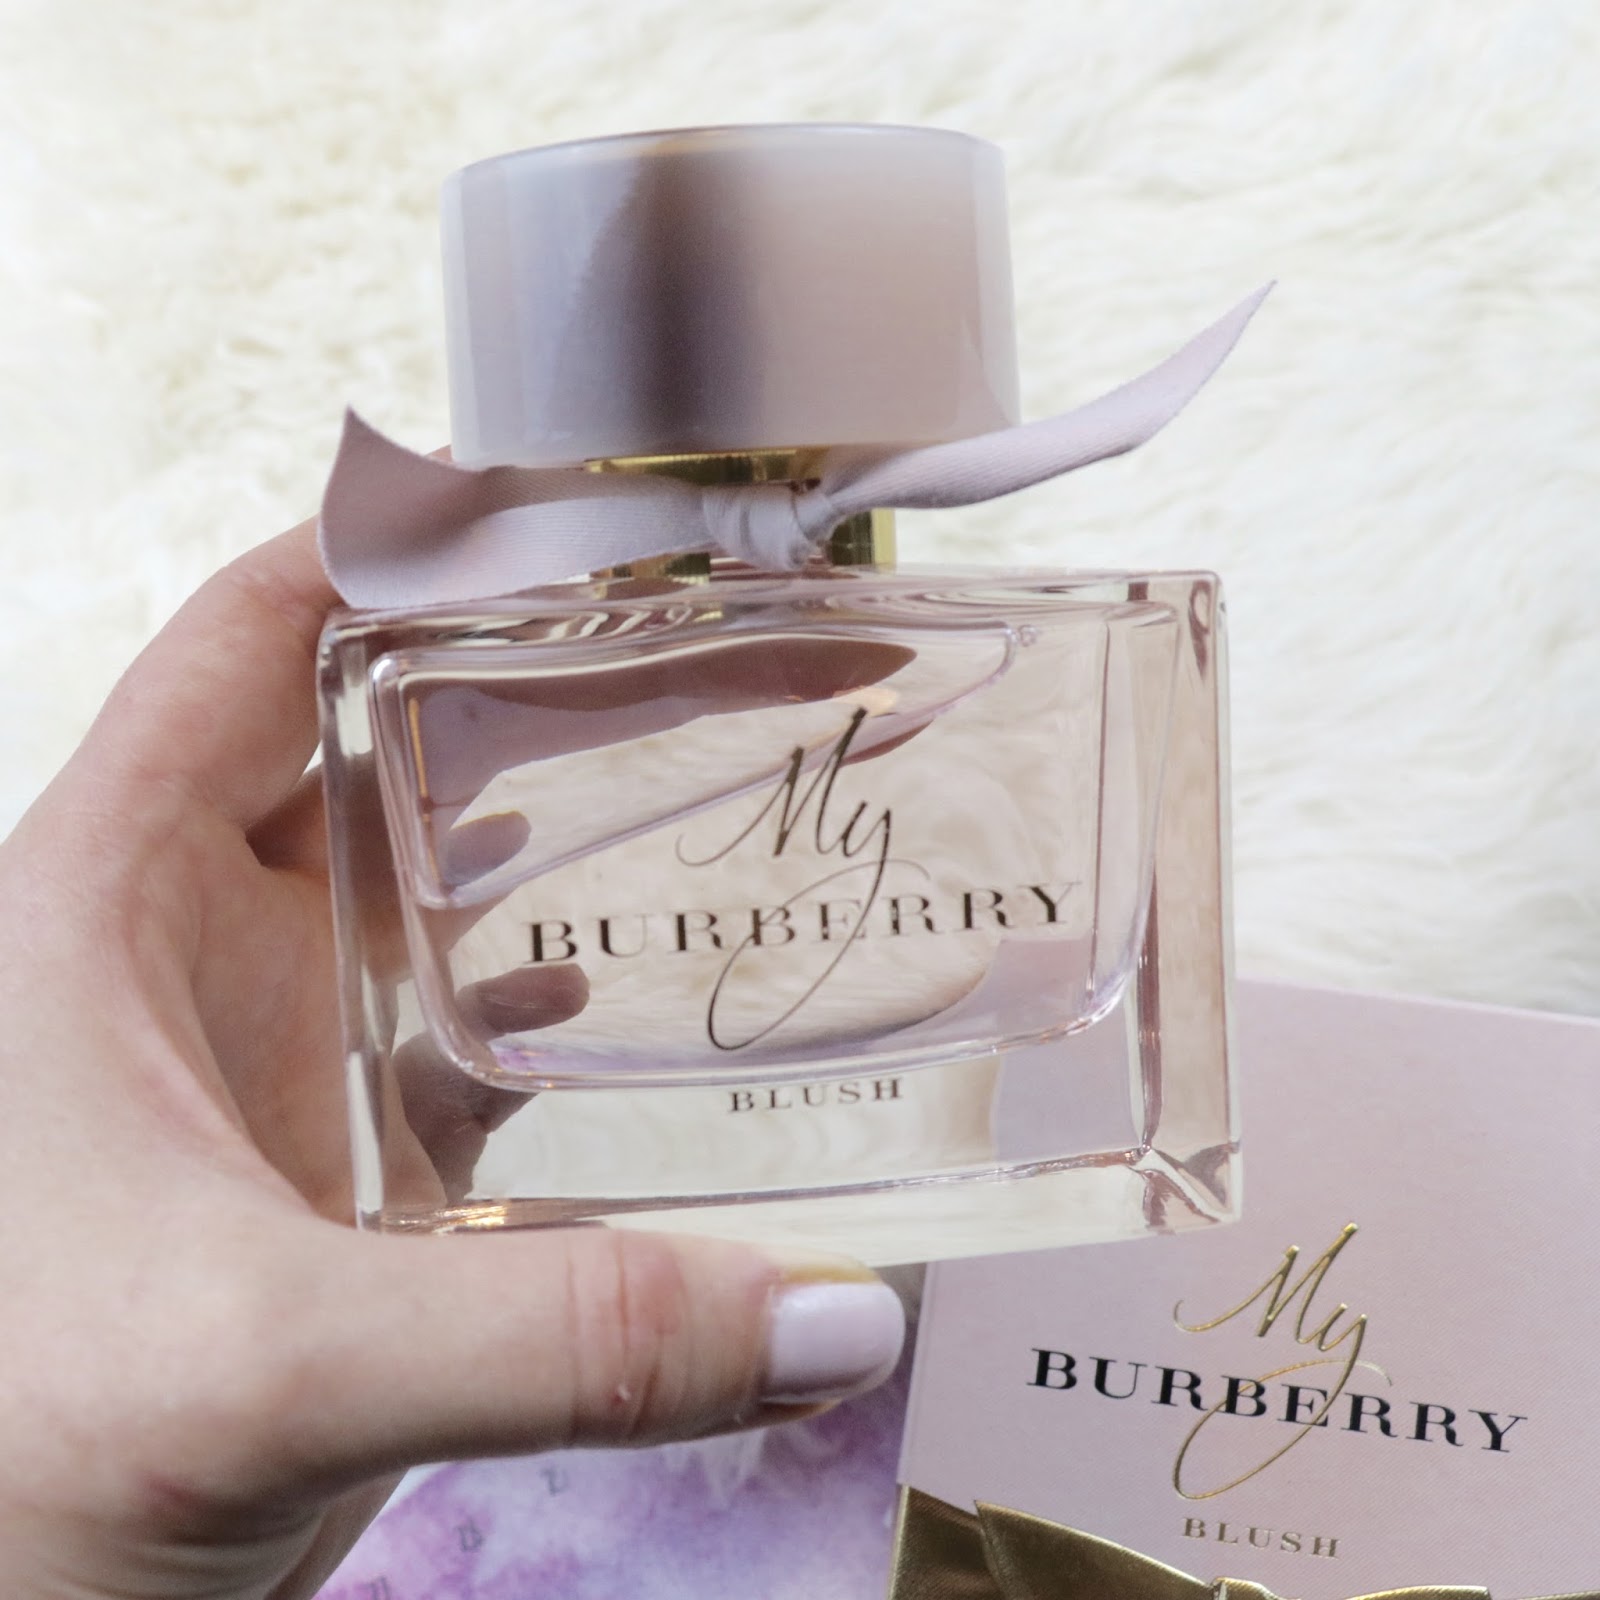 What is the Most popular Burberry Perfume